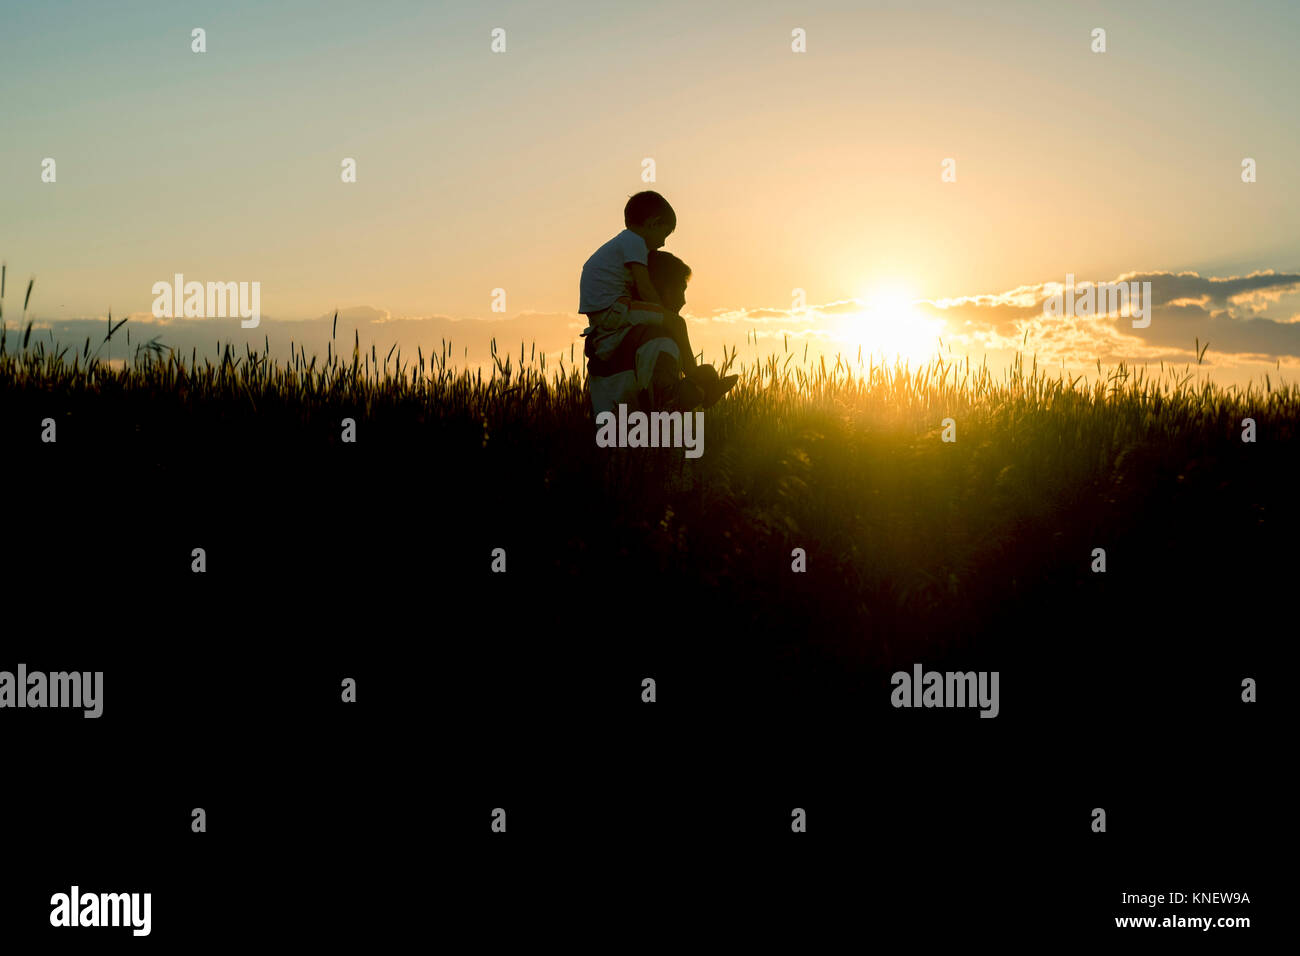 Father and son walking through fields, father carrying son on shoulders, Ural, Chelyabinsk, Russia, Europe Stock Photo